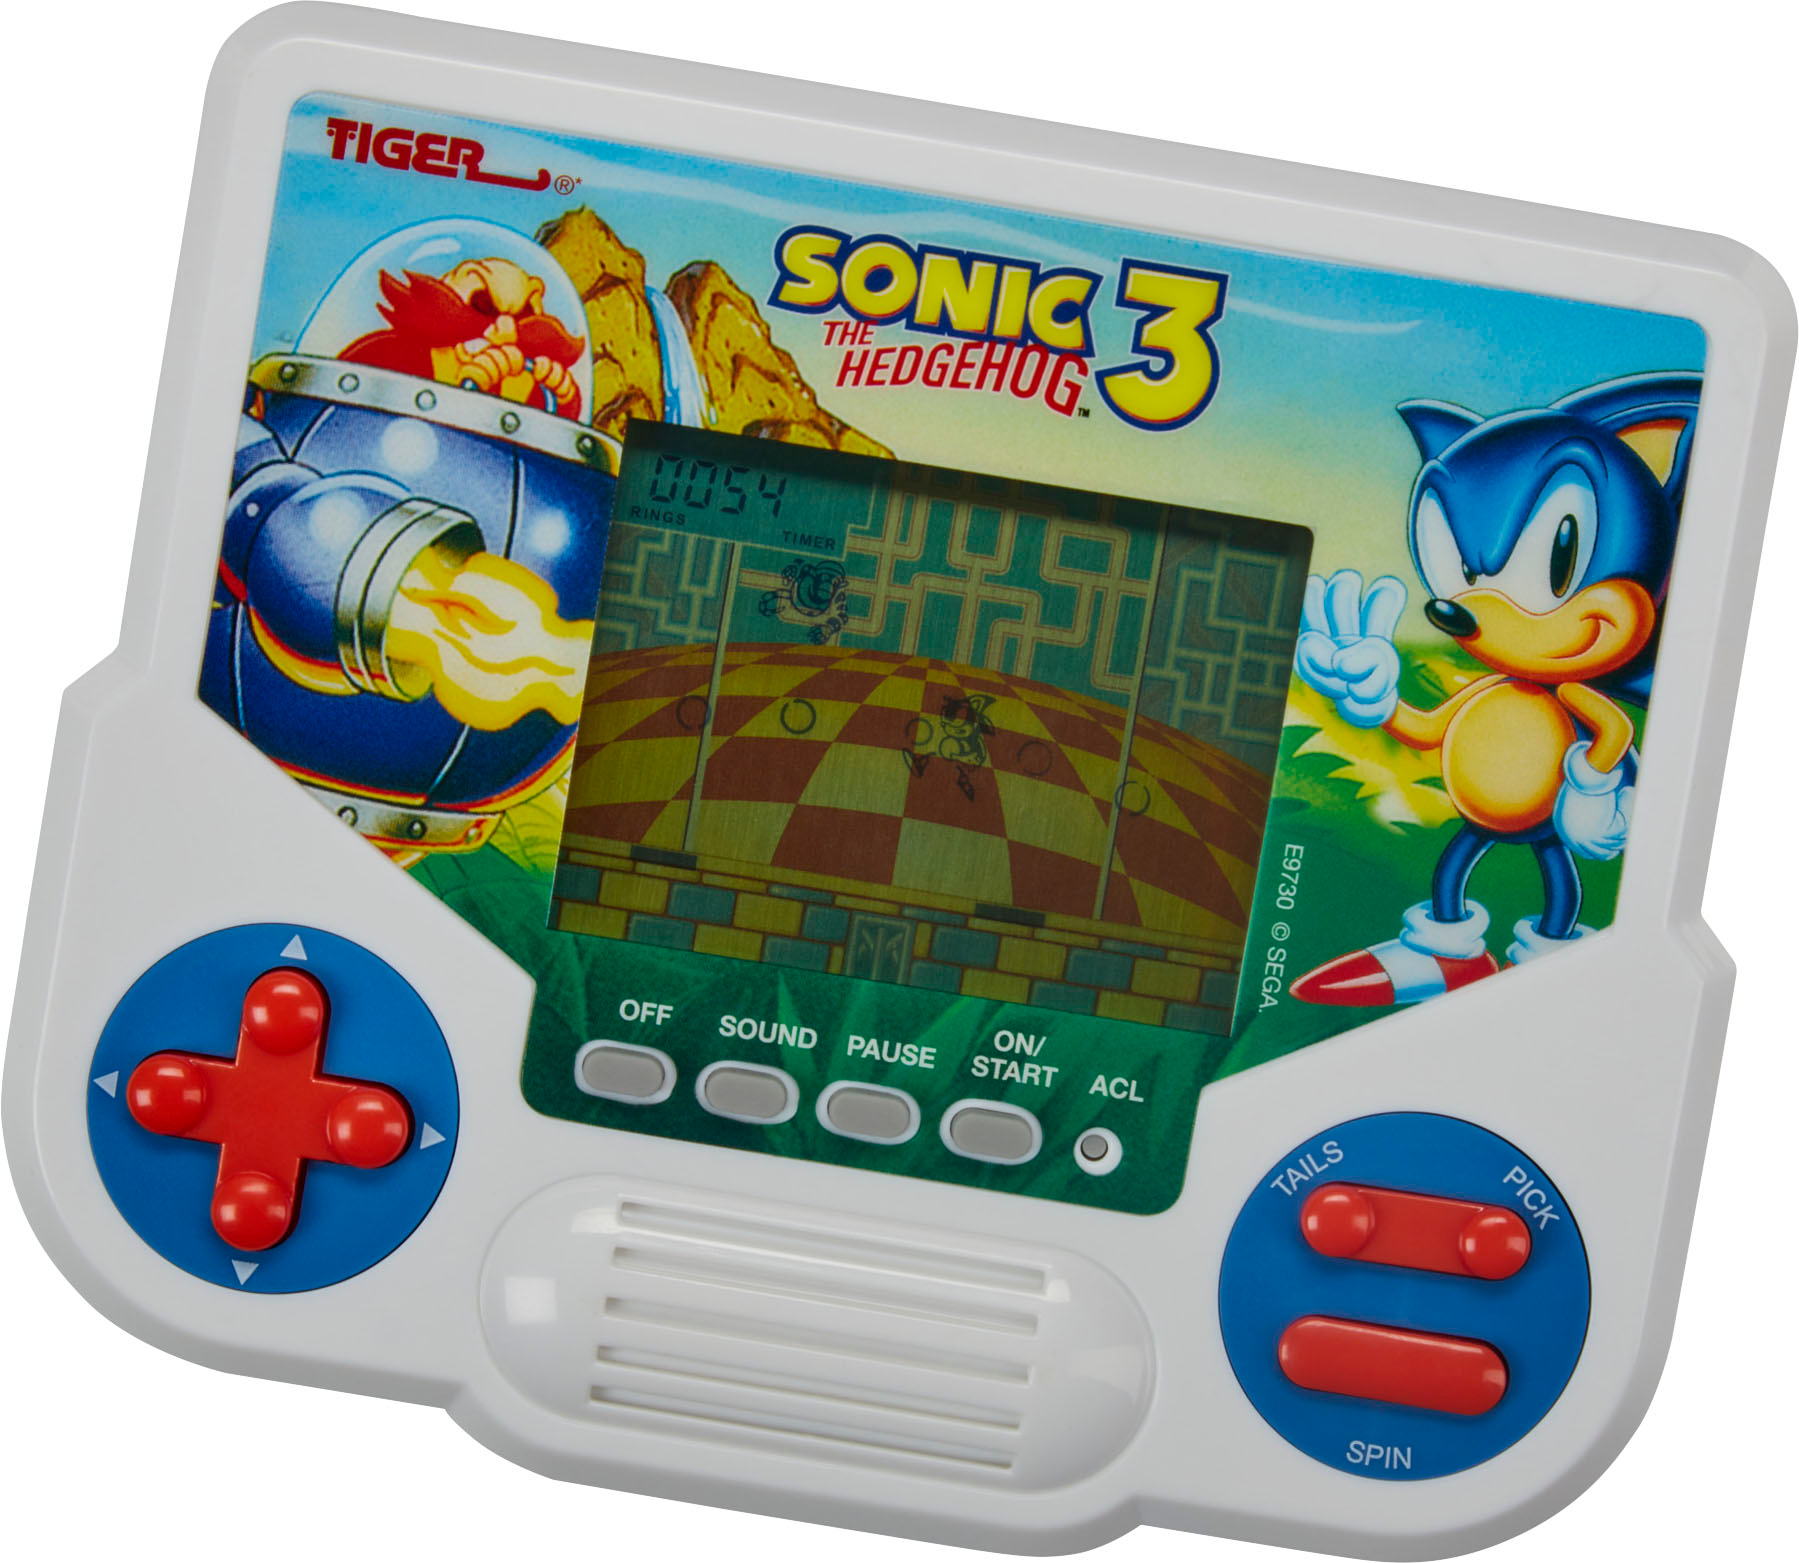 Co-Optimus - Screens - Remember Back When Sonic the Hedgehog Was 2